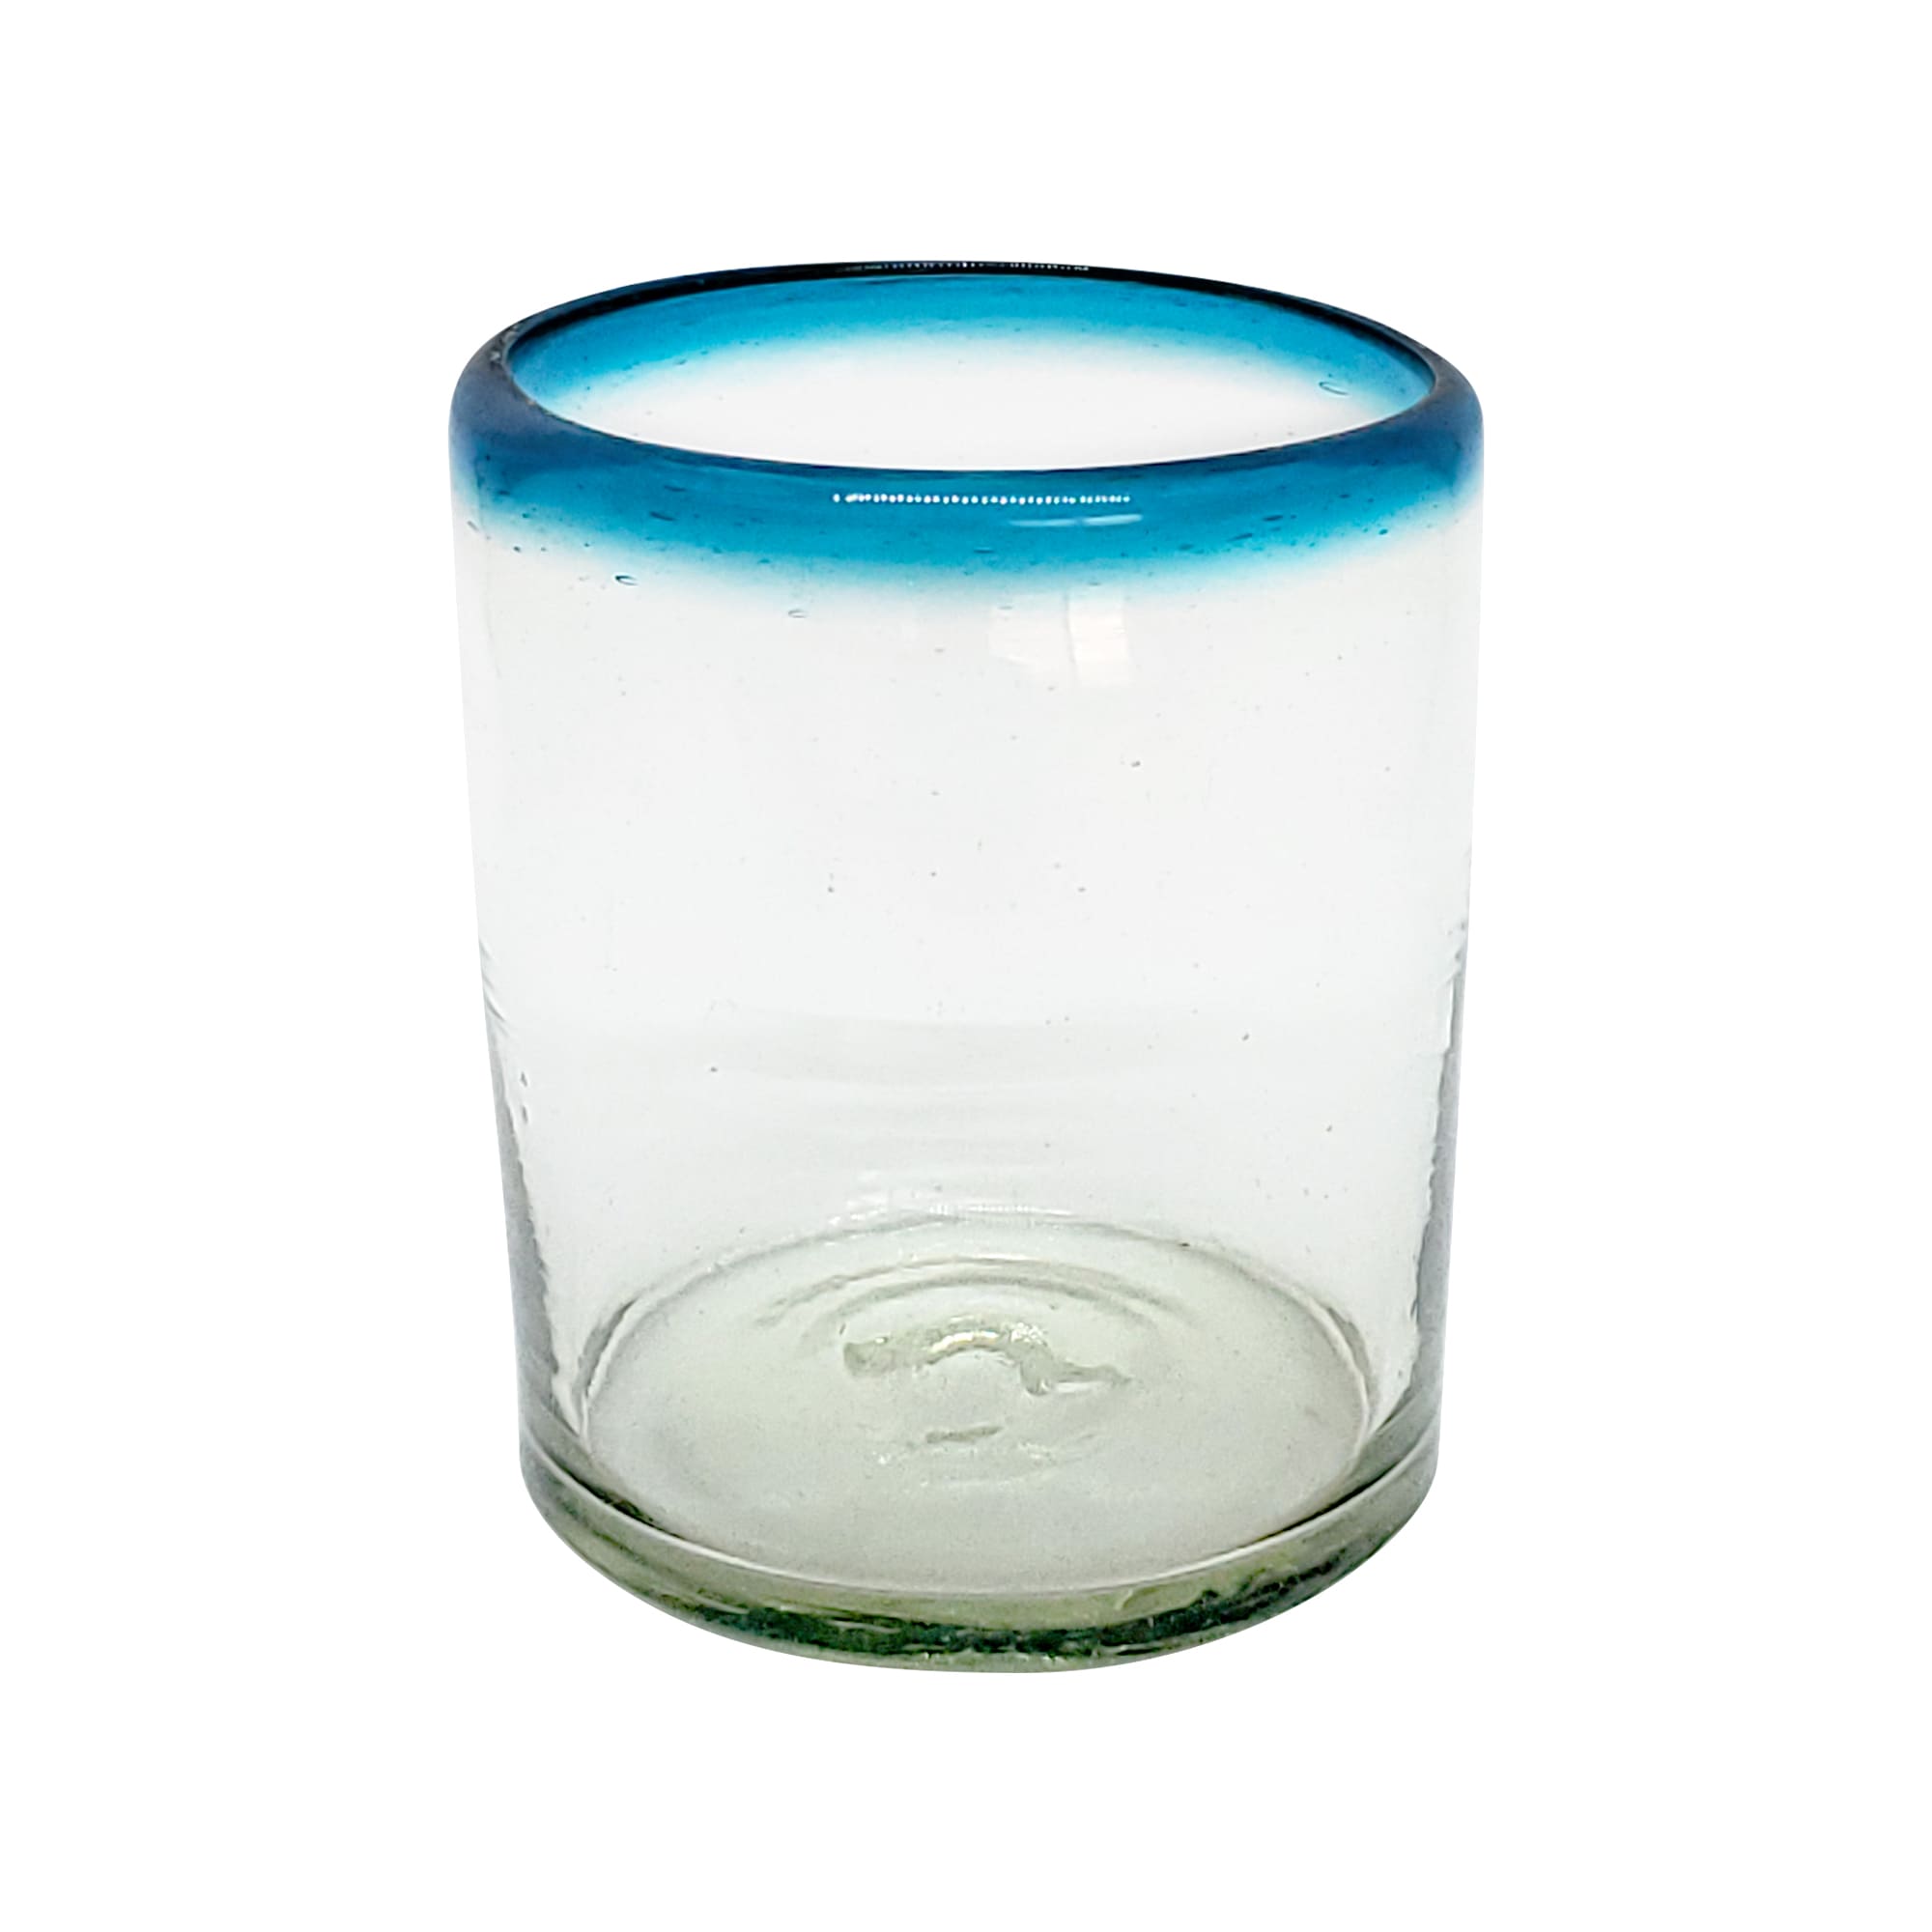 Wholesale Mexican Glasses / Aqua Blue Rim 10 oz Tumblers  / These tumblers are a great complement for your pitcher and drinking glasses set.<br>1-Year Product Replacement in case of defects (glasses broken in dishwasher is considered a defect).